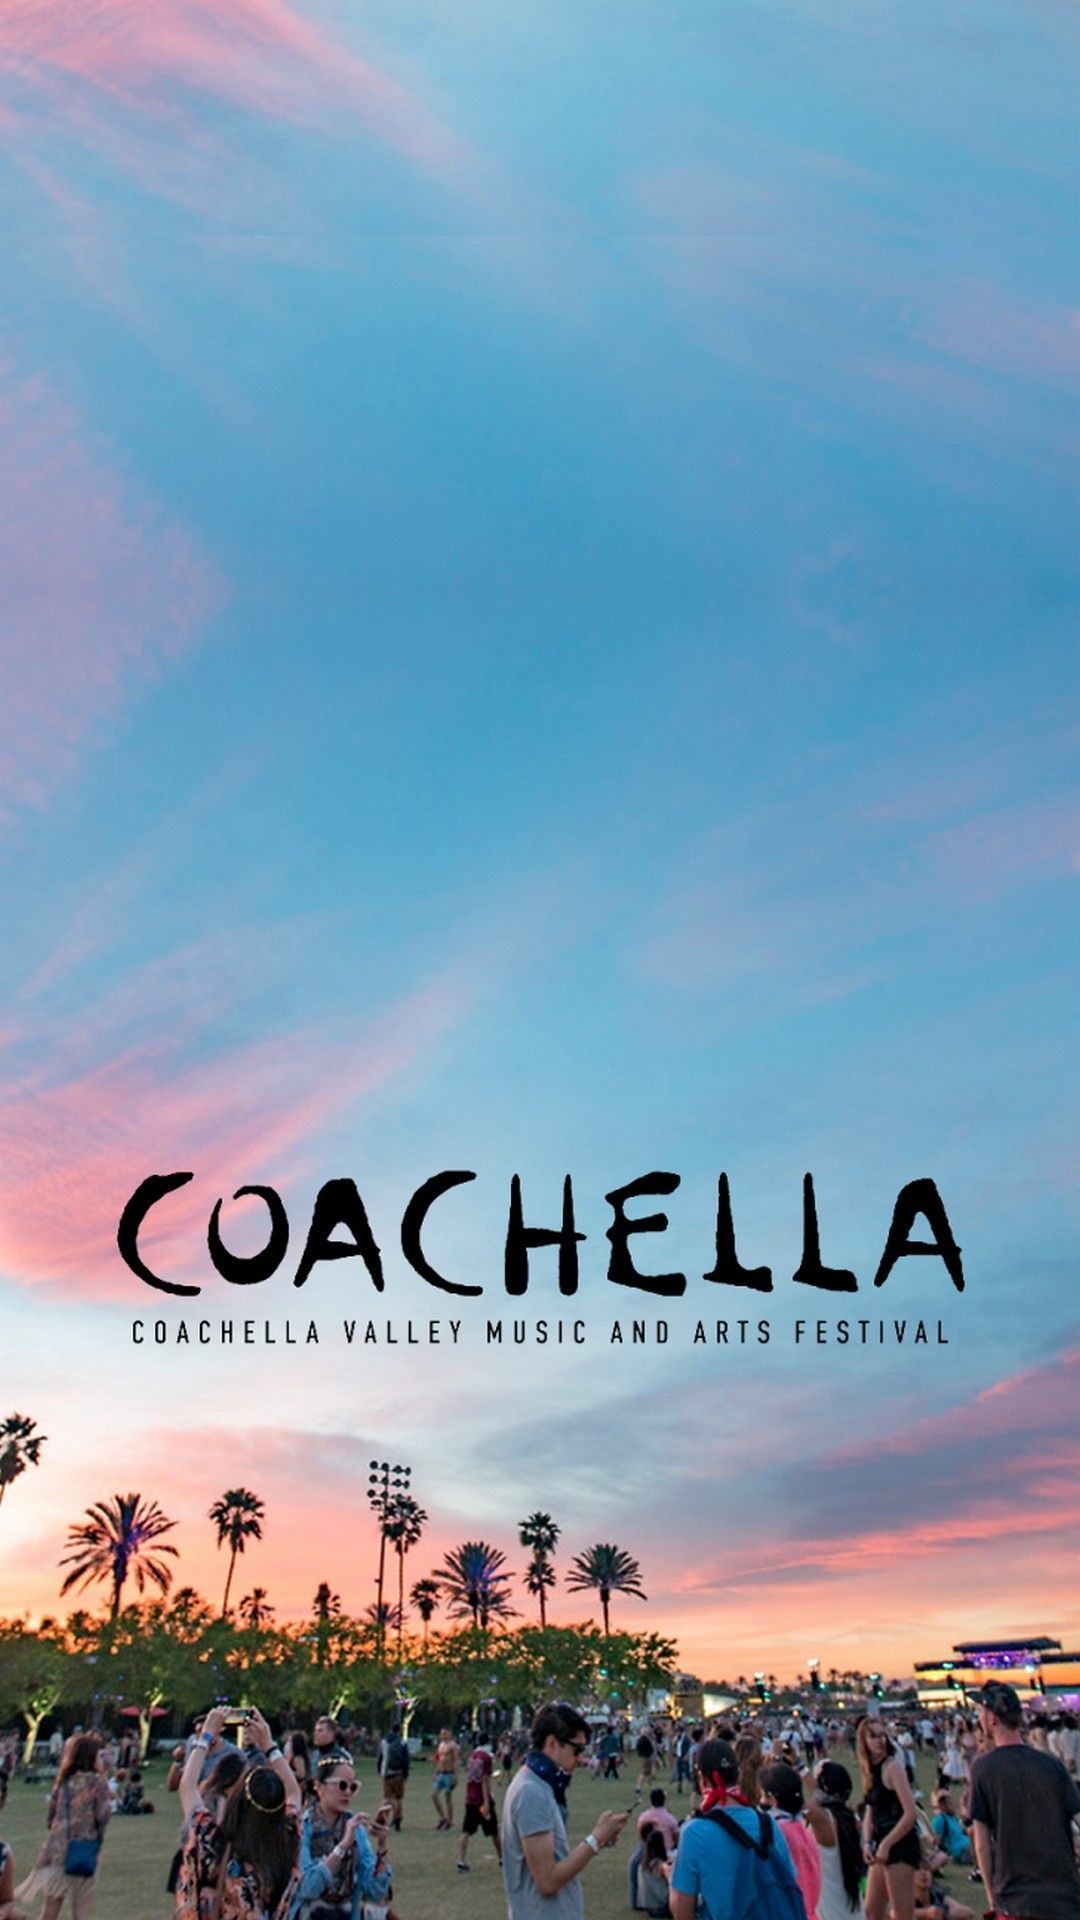 Coachella wallpapers, Vibrant visuals, Background options, Customize your device, 1080x1920 Full HD Handy